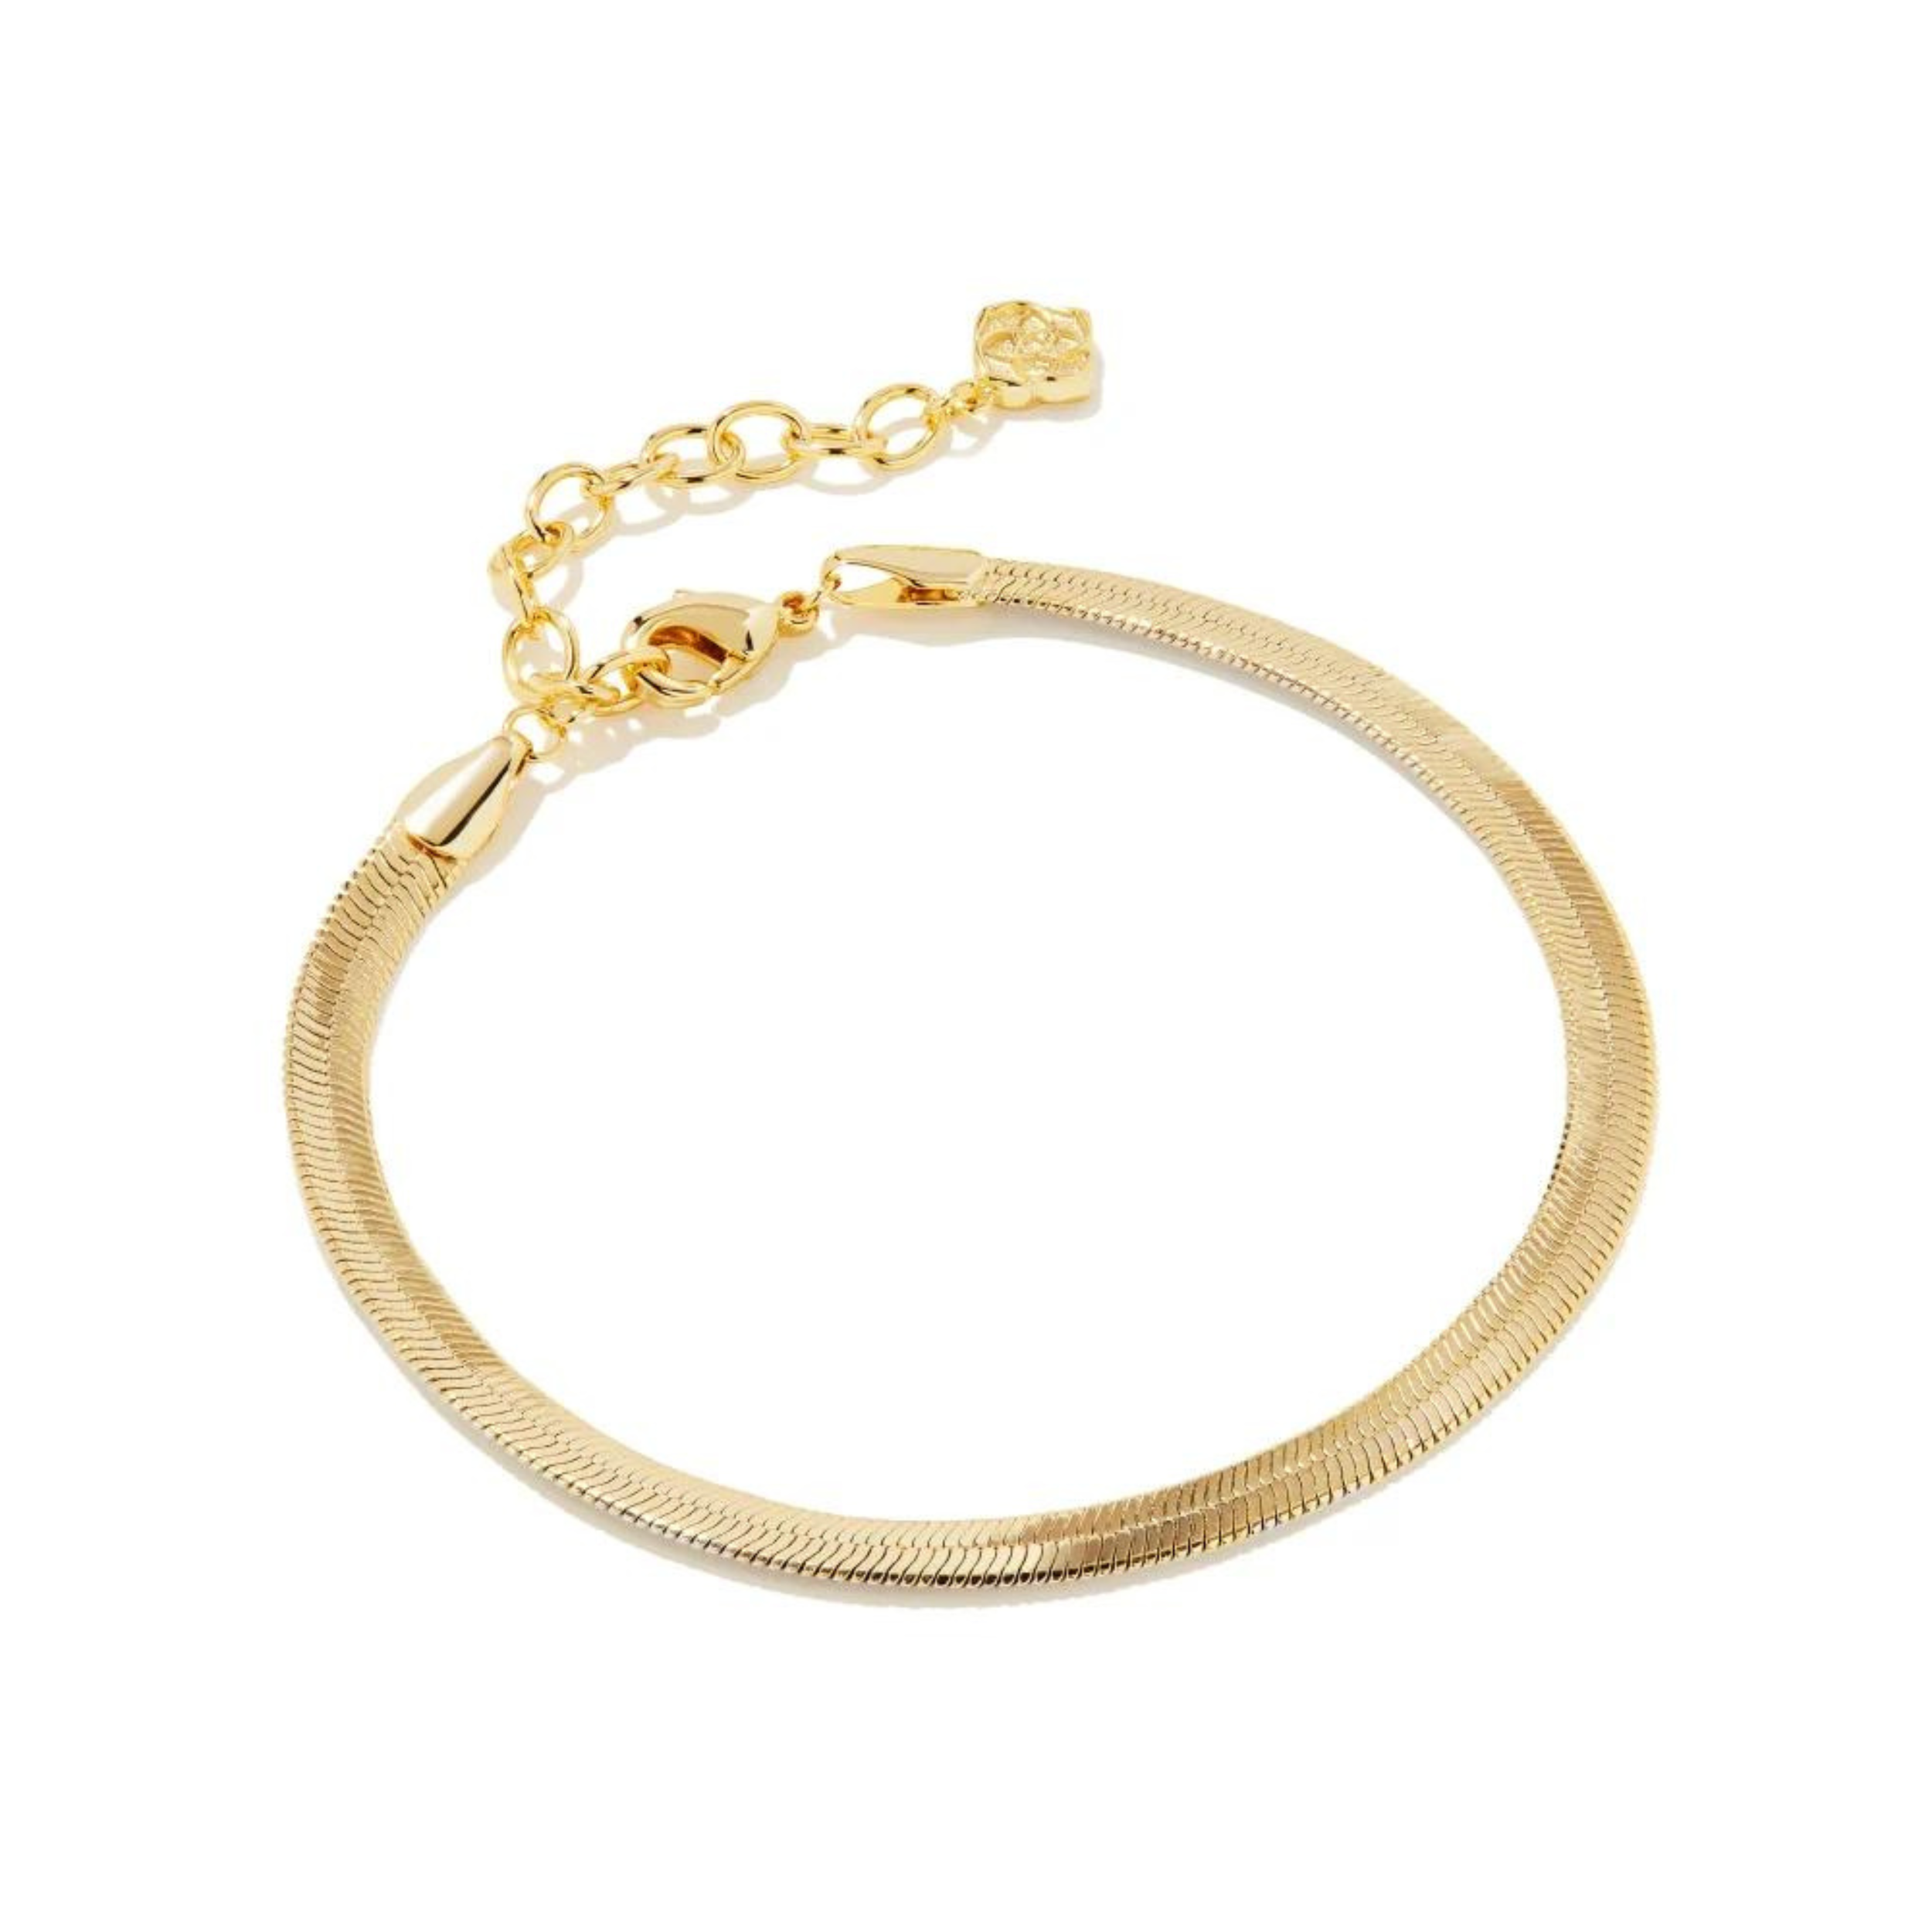 Pictured is a gold snake chain bracelet on a white background.